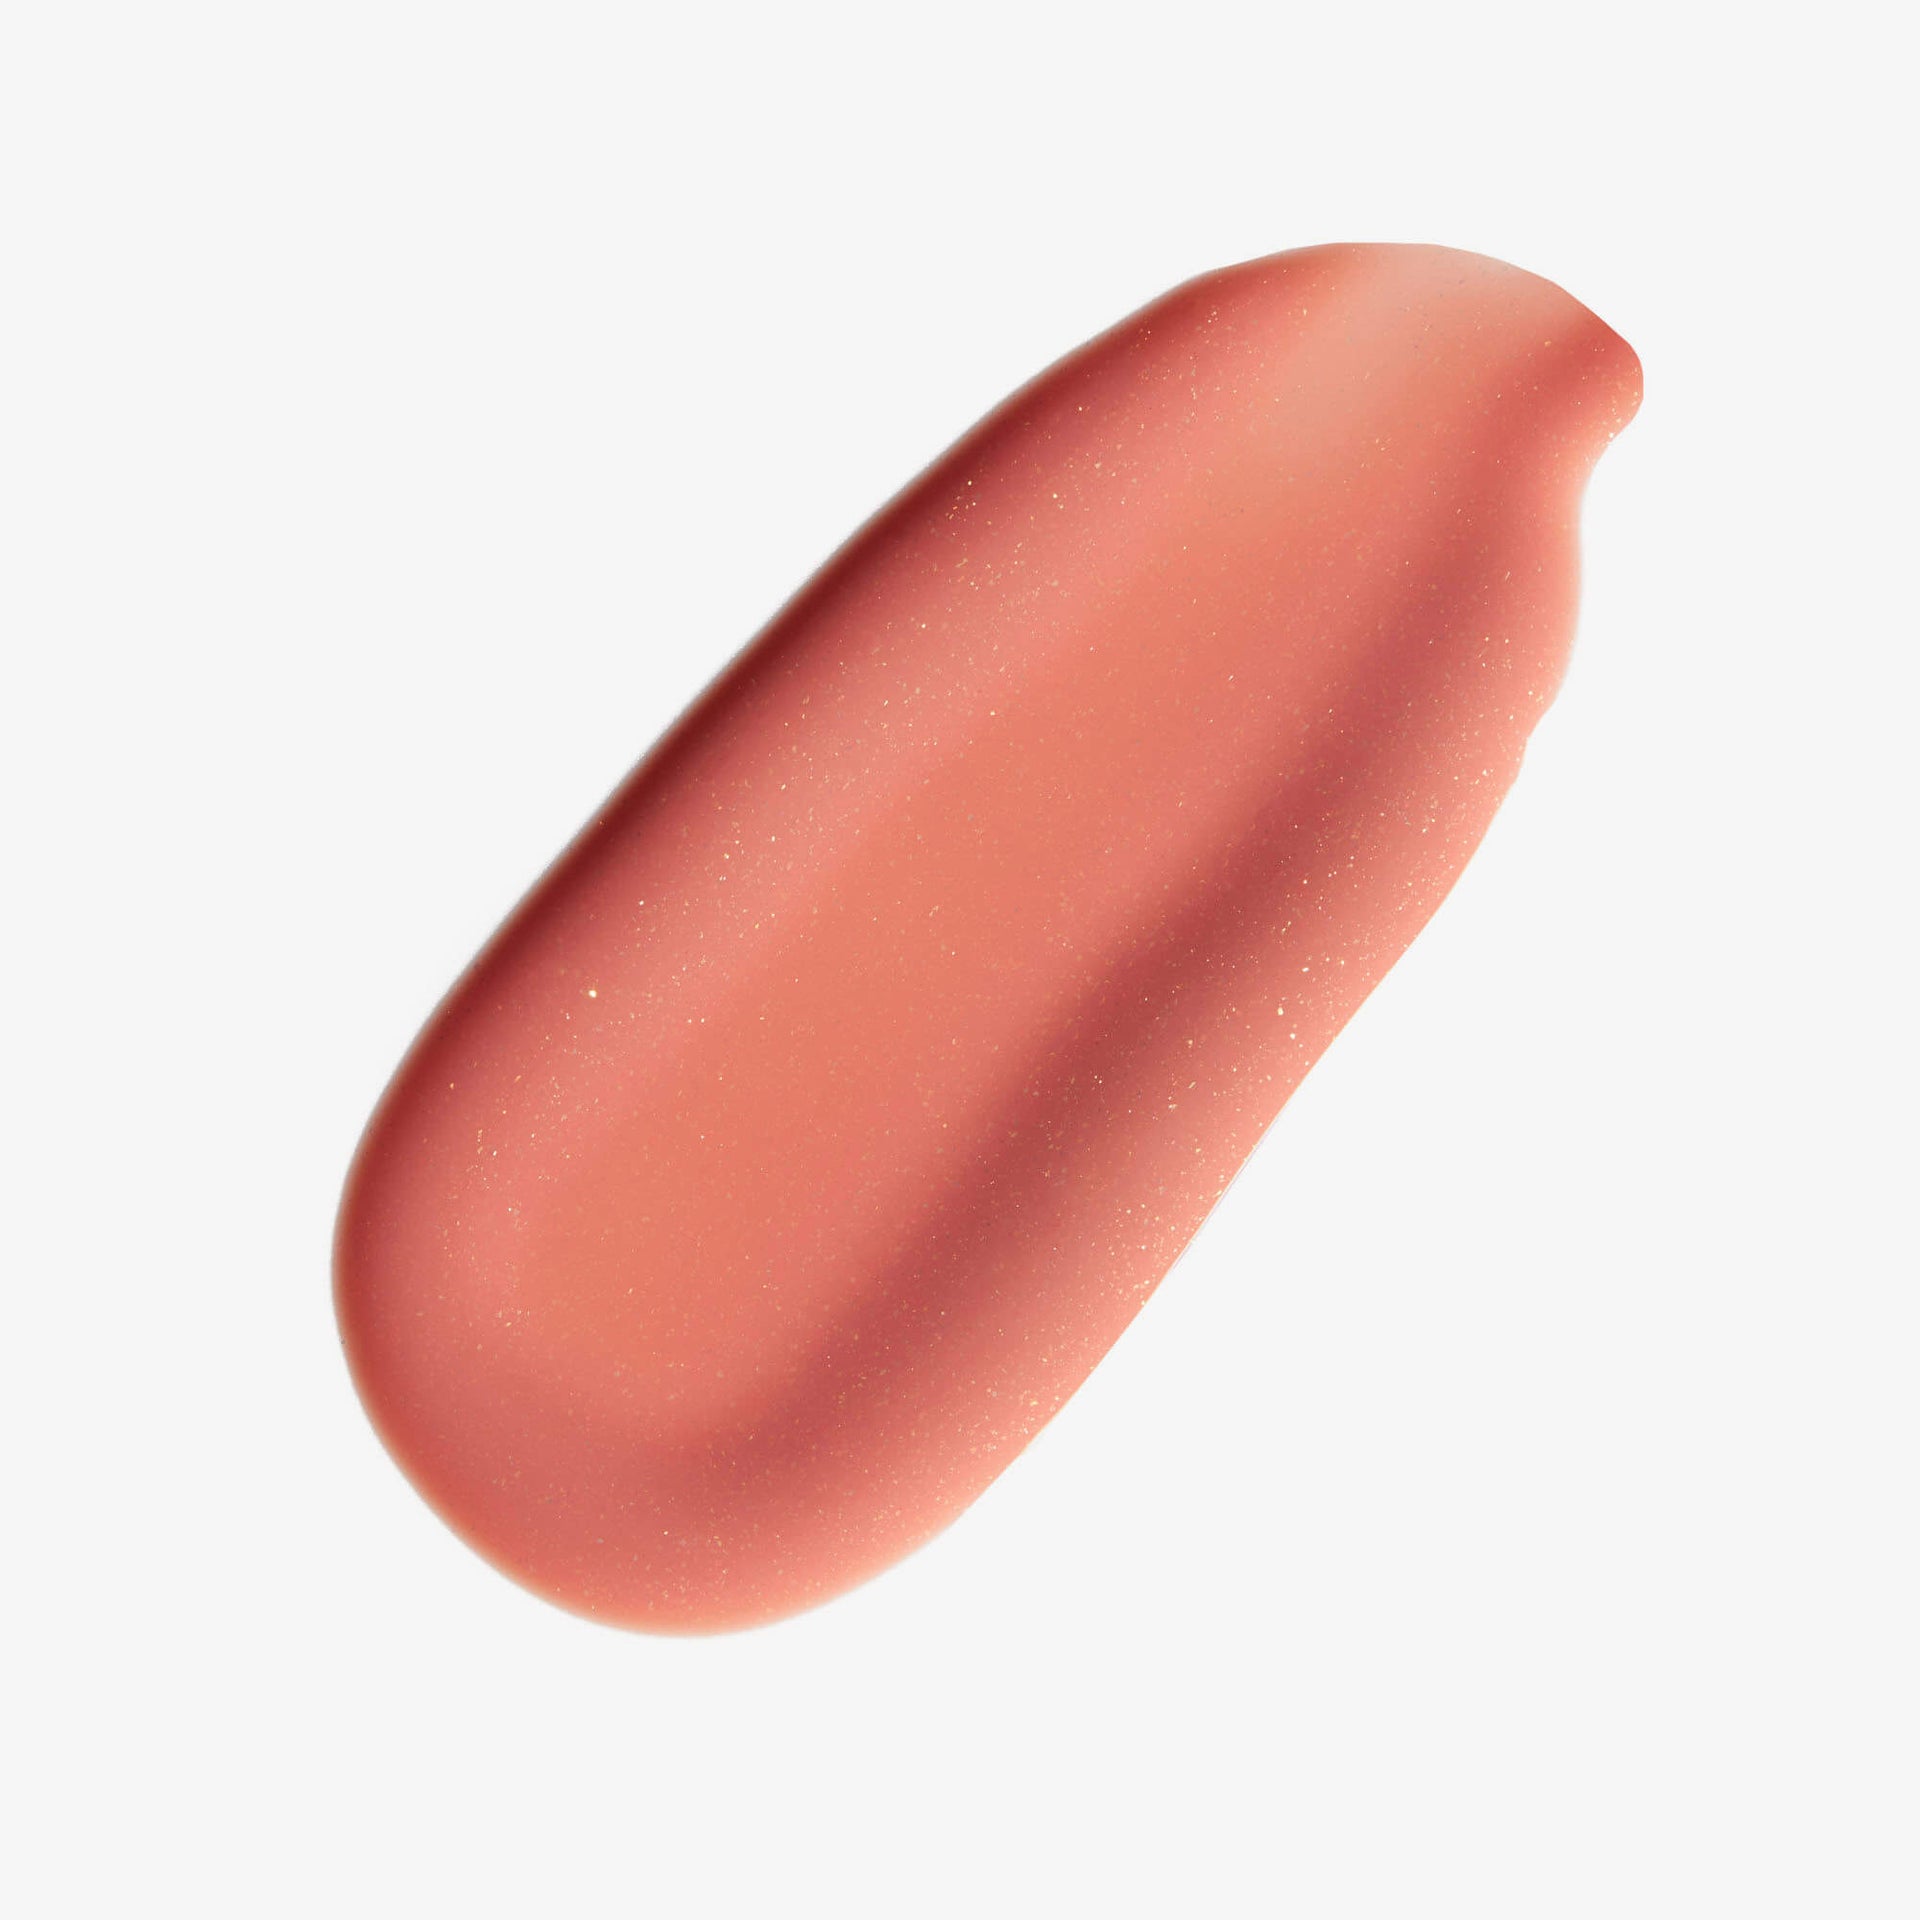 Toffee Rose |Lip Gloss Swatch Shade Toffee Rose